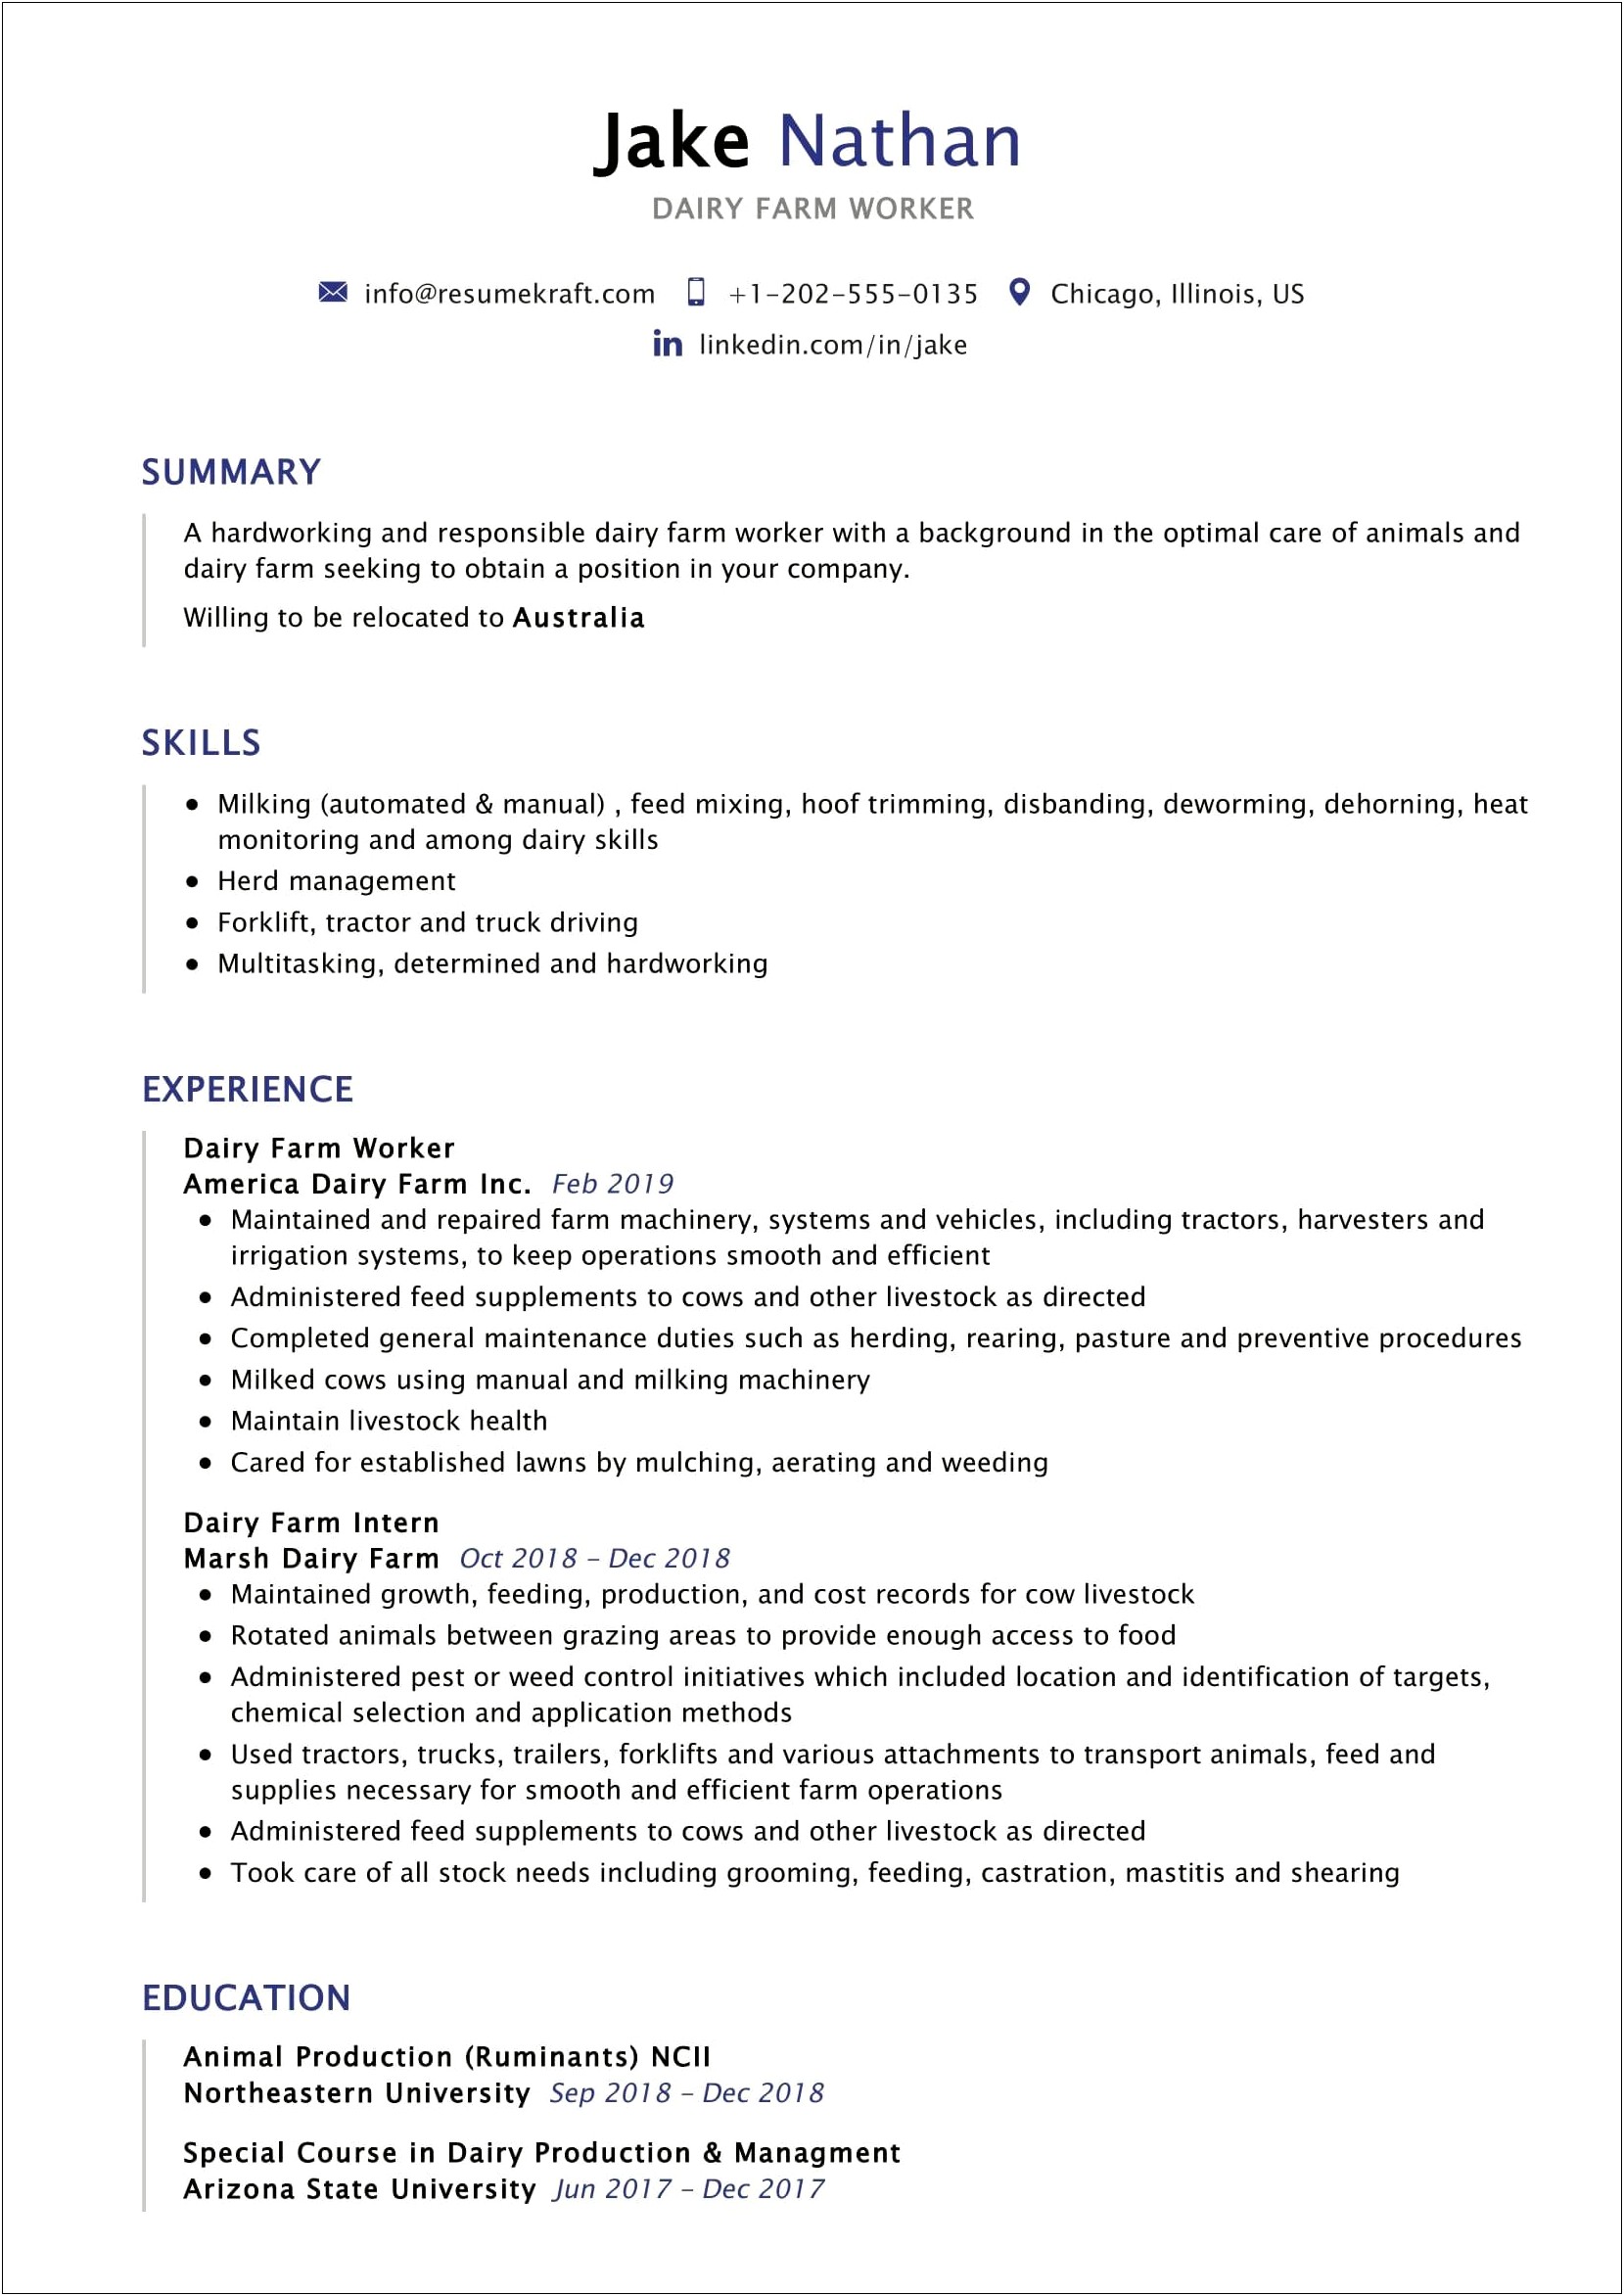 Resume Objective For Process Worker